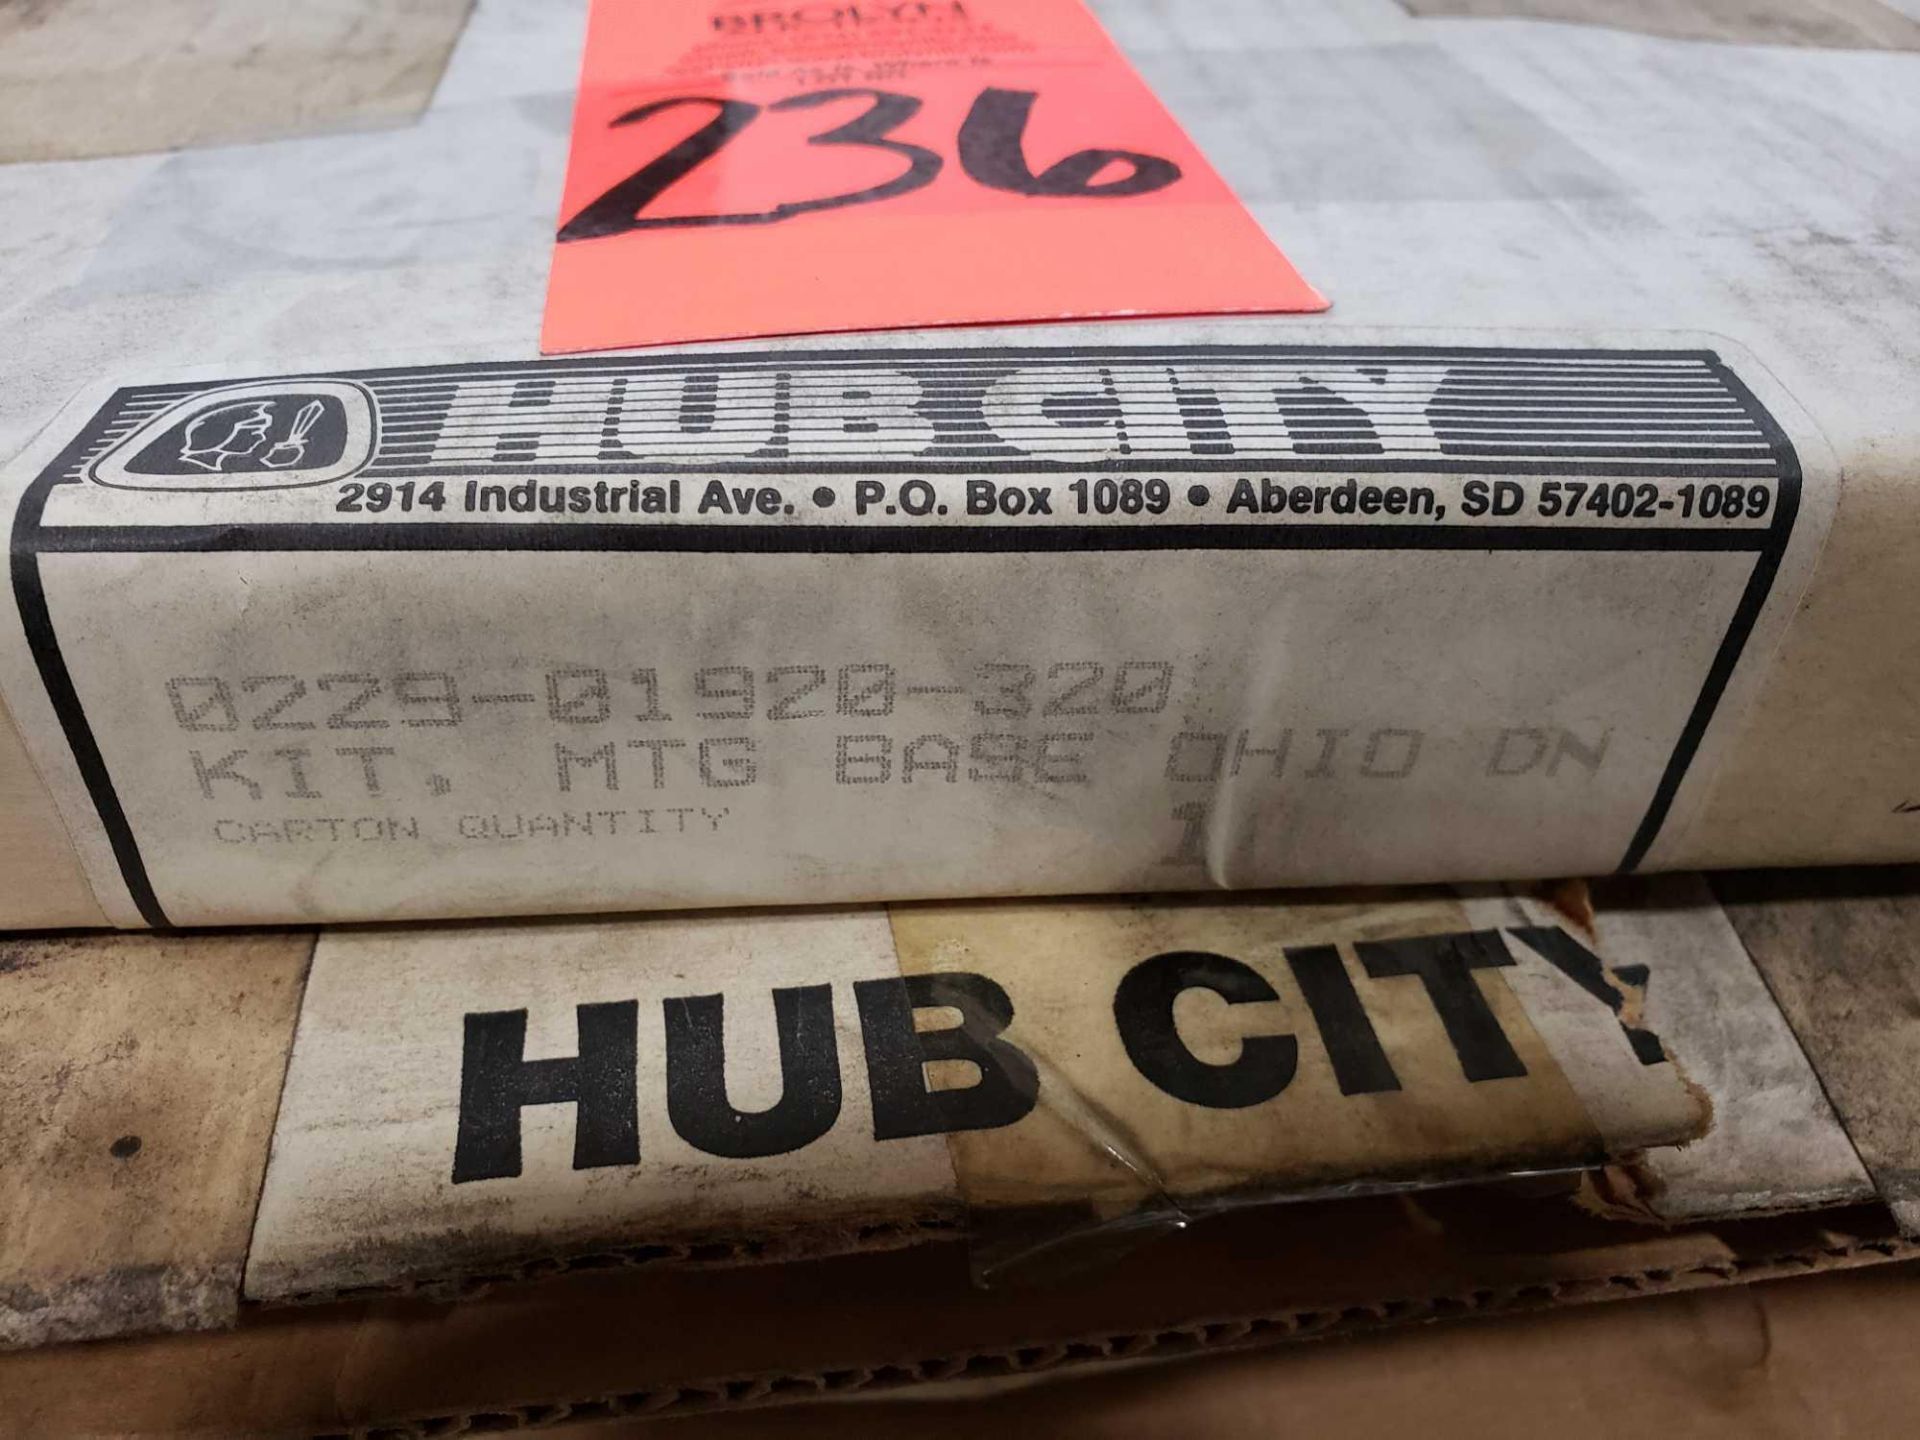 Qty 3 - Hub City model 0229-01920-320. New in boxes. - Image 2 of 2